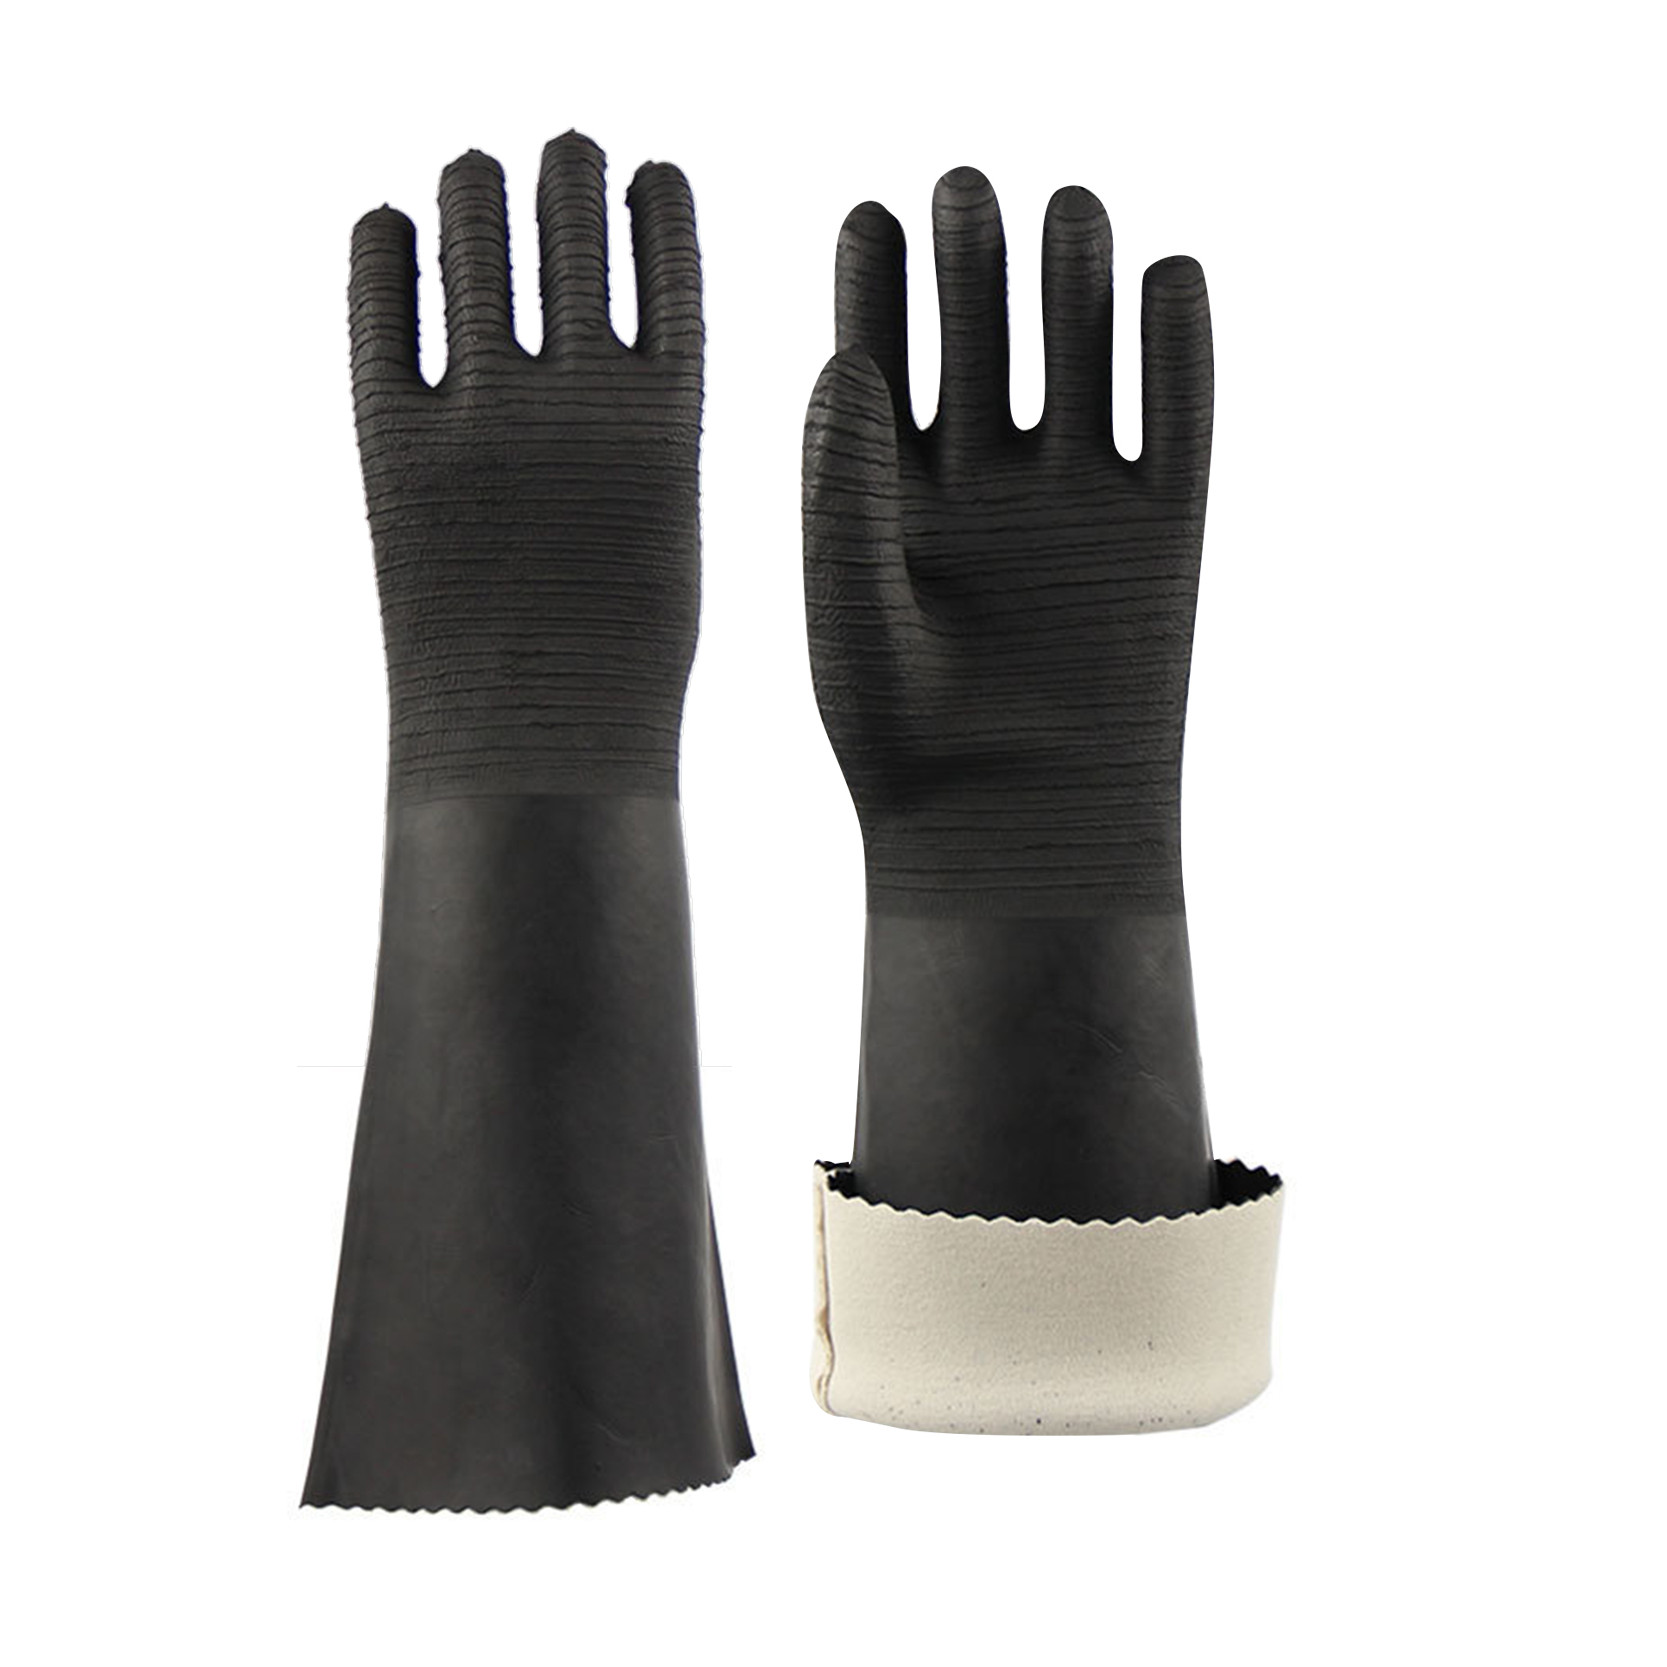 Chemical Resistant Gloves, Waterproof Reusable Cleaning Protective Safety Work Gloves Featured Duab